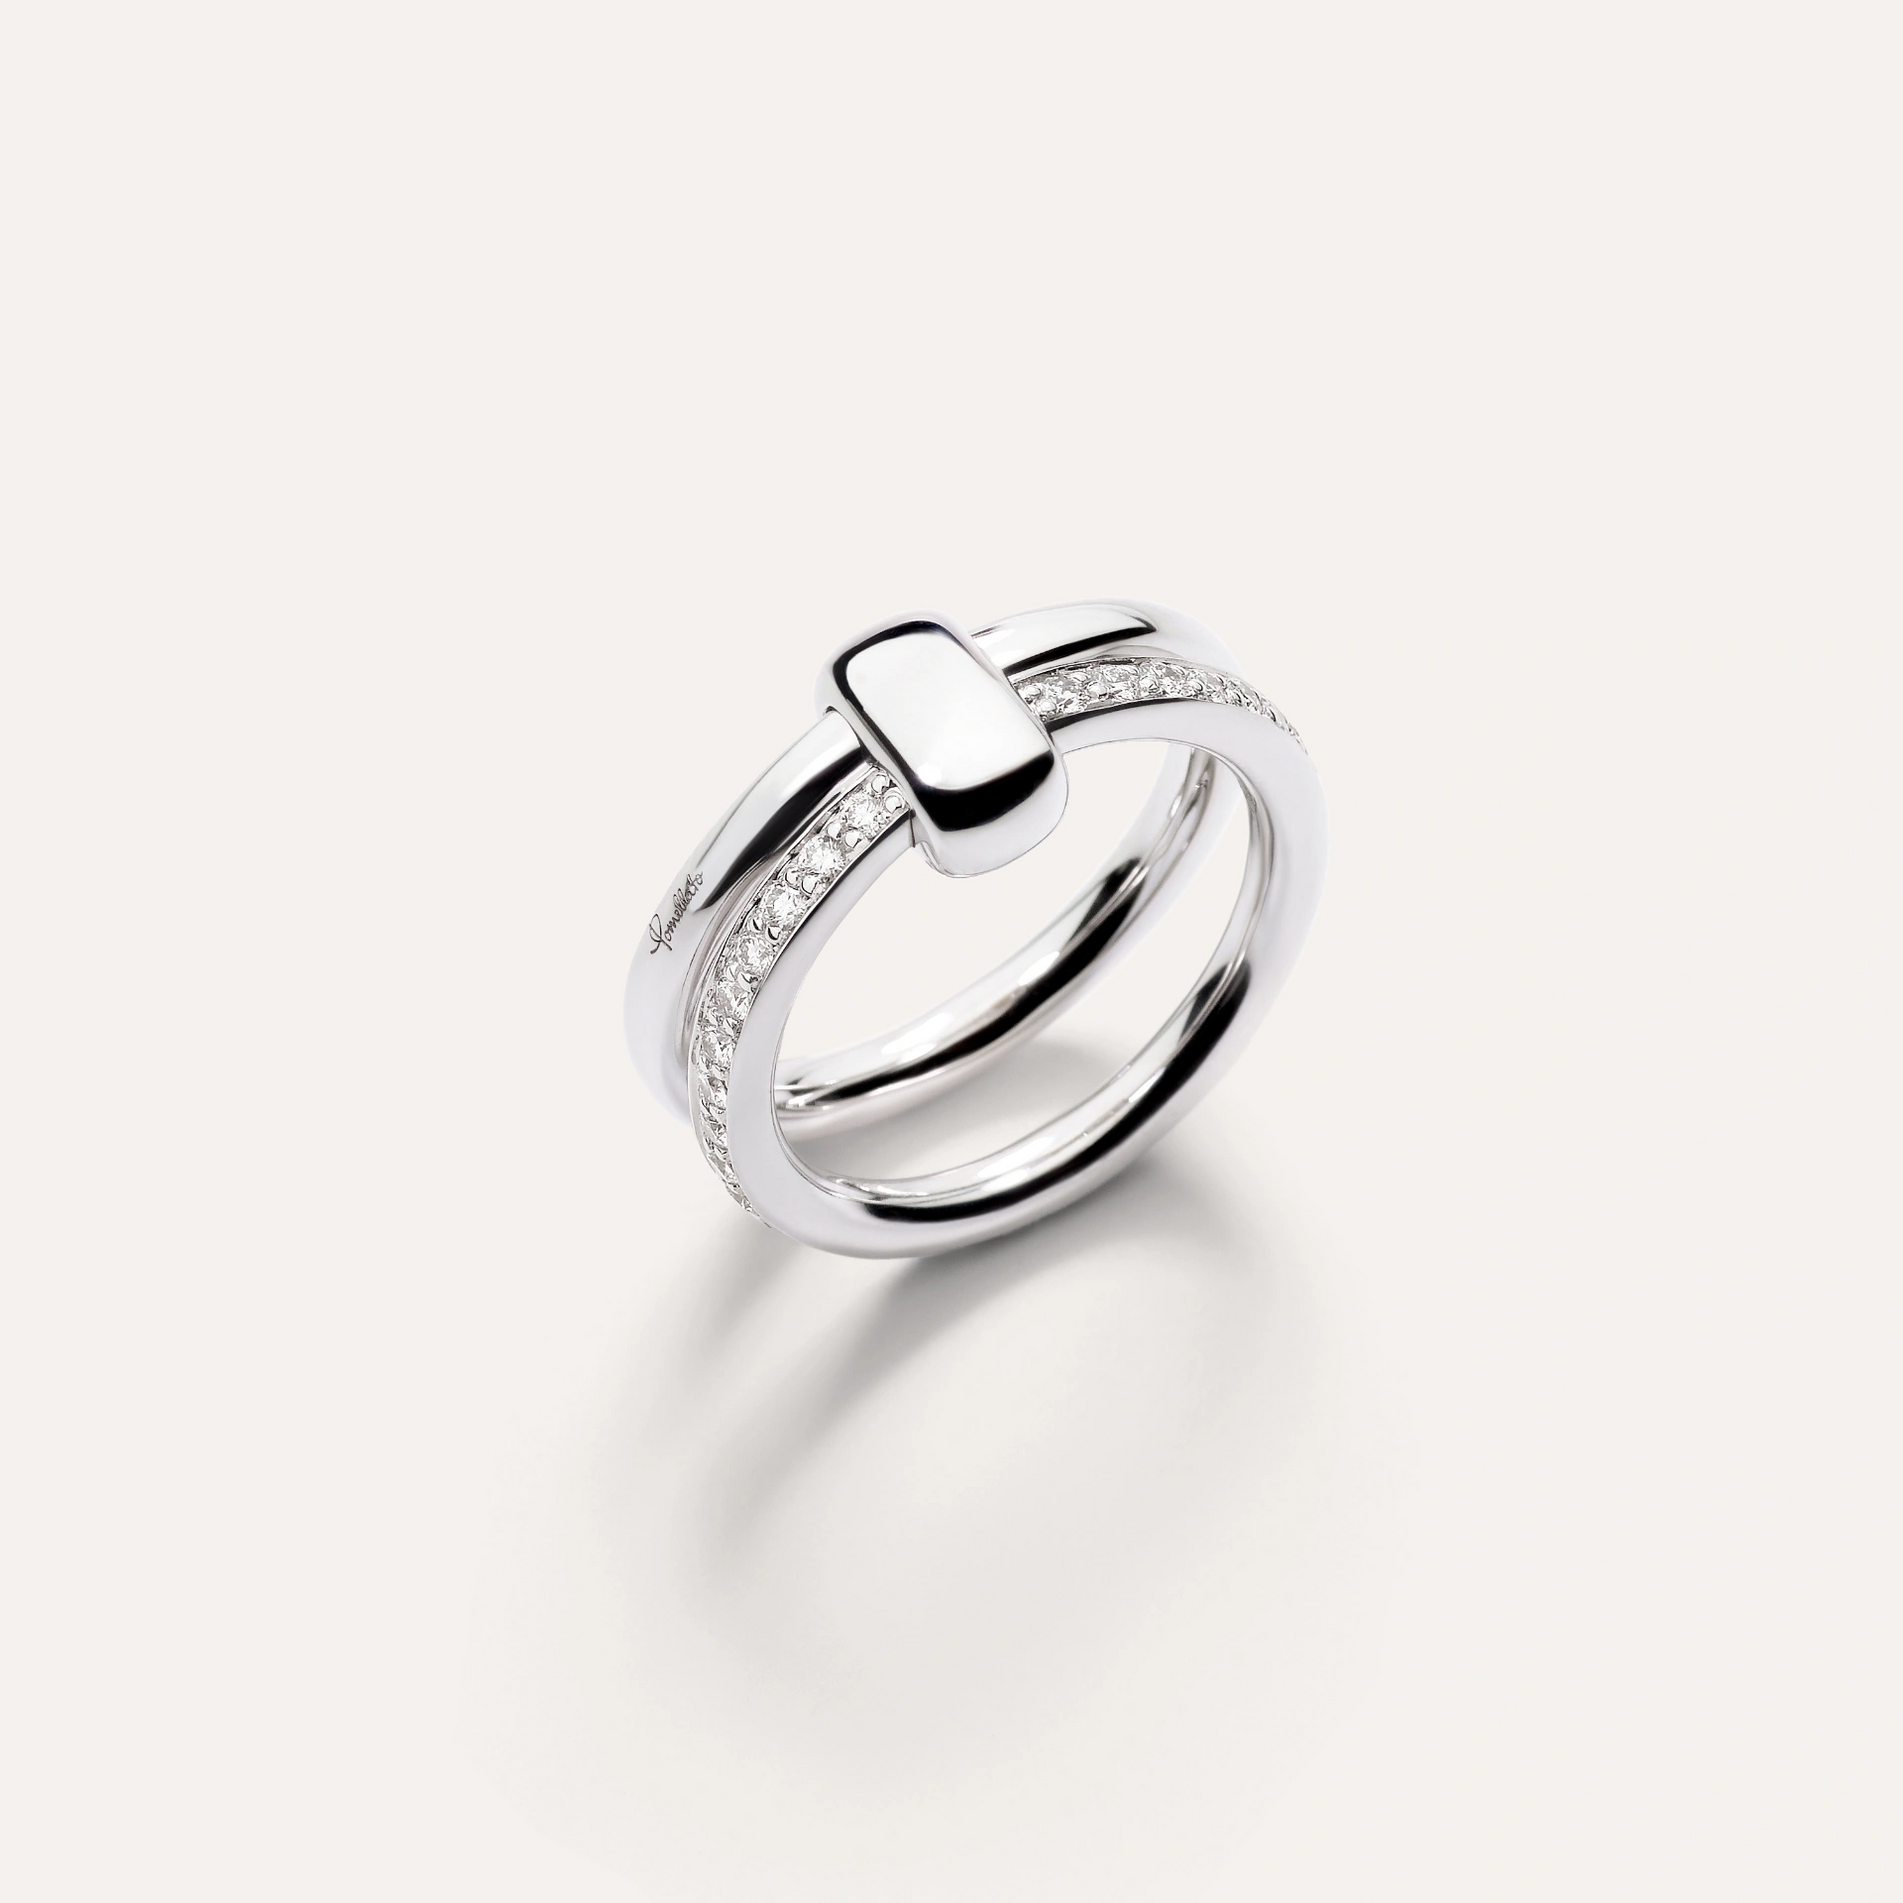 Pomellato Together Ring in 18k White Gold with Diamonds - Orsini Jewellers